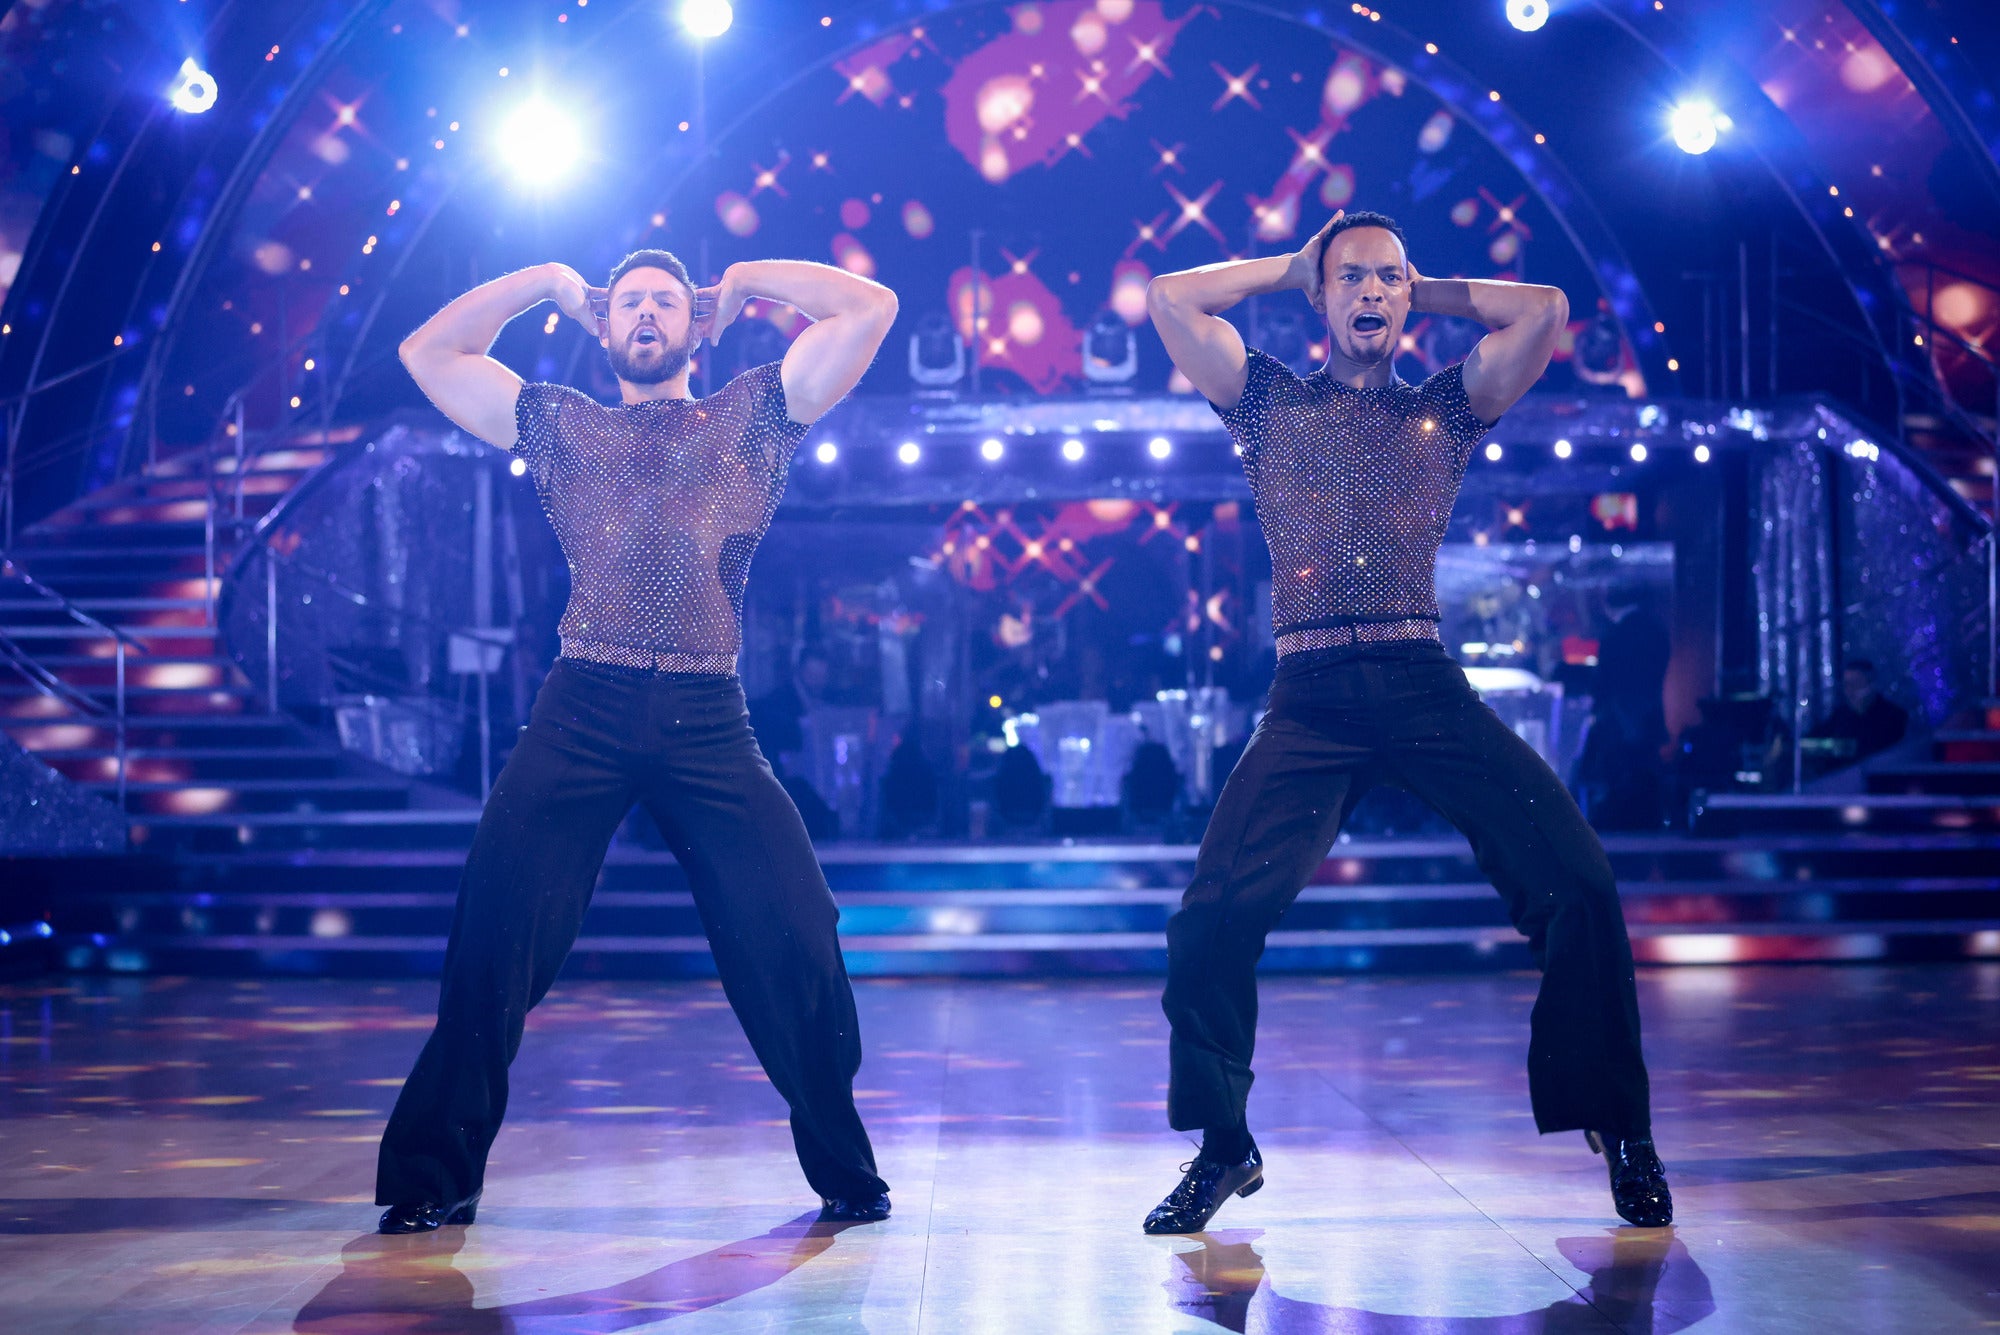 John Whaite and Johannes Radebe have made the ‘Strictly’ final